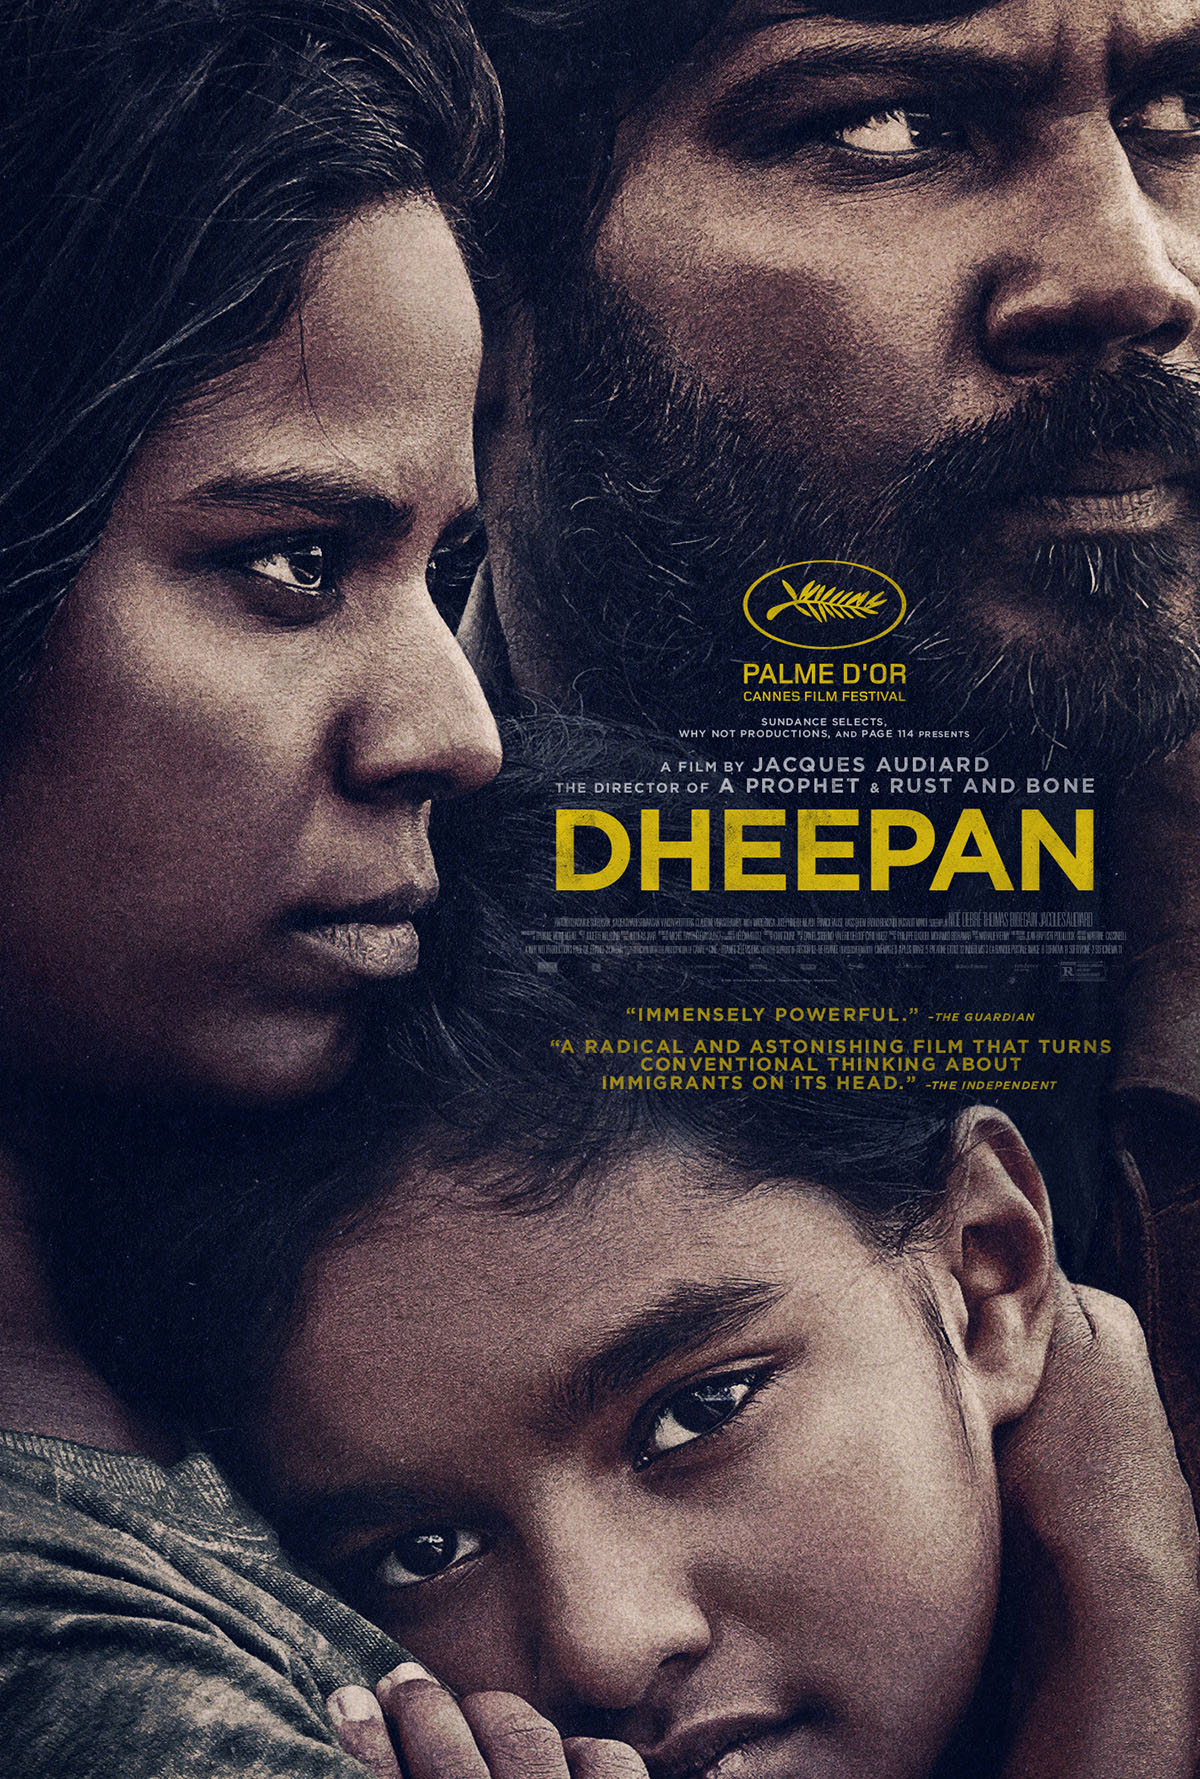 Image of the movie poster. The side face profile of man woman and a child being held close to the mother's chest.